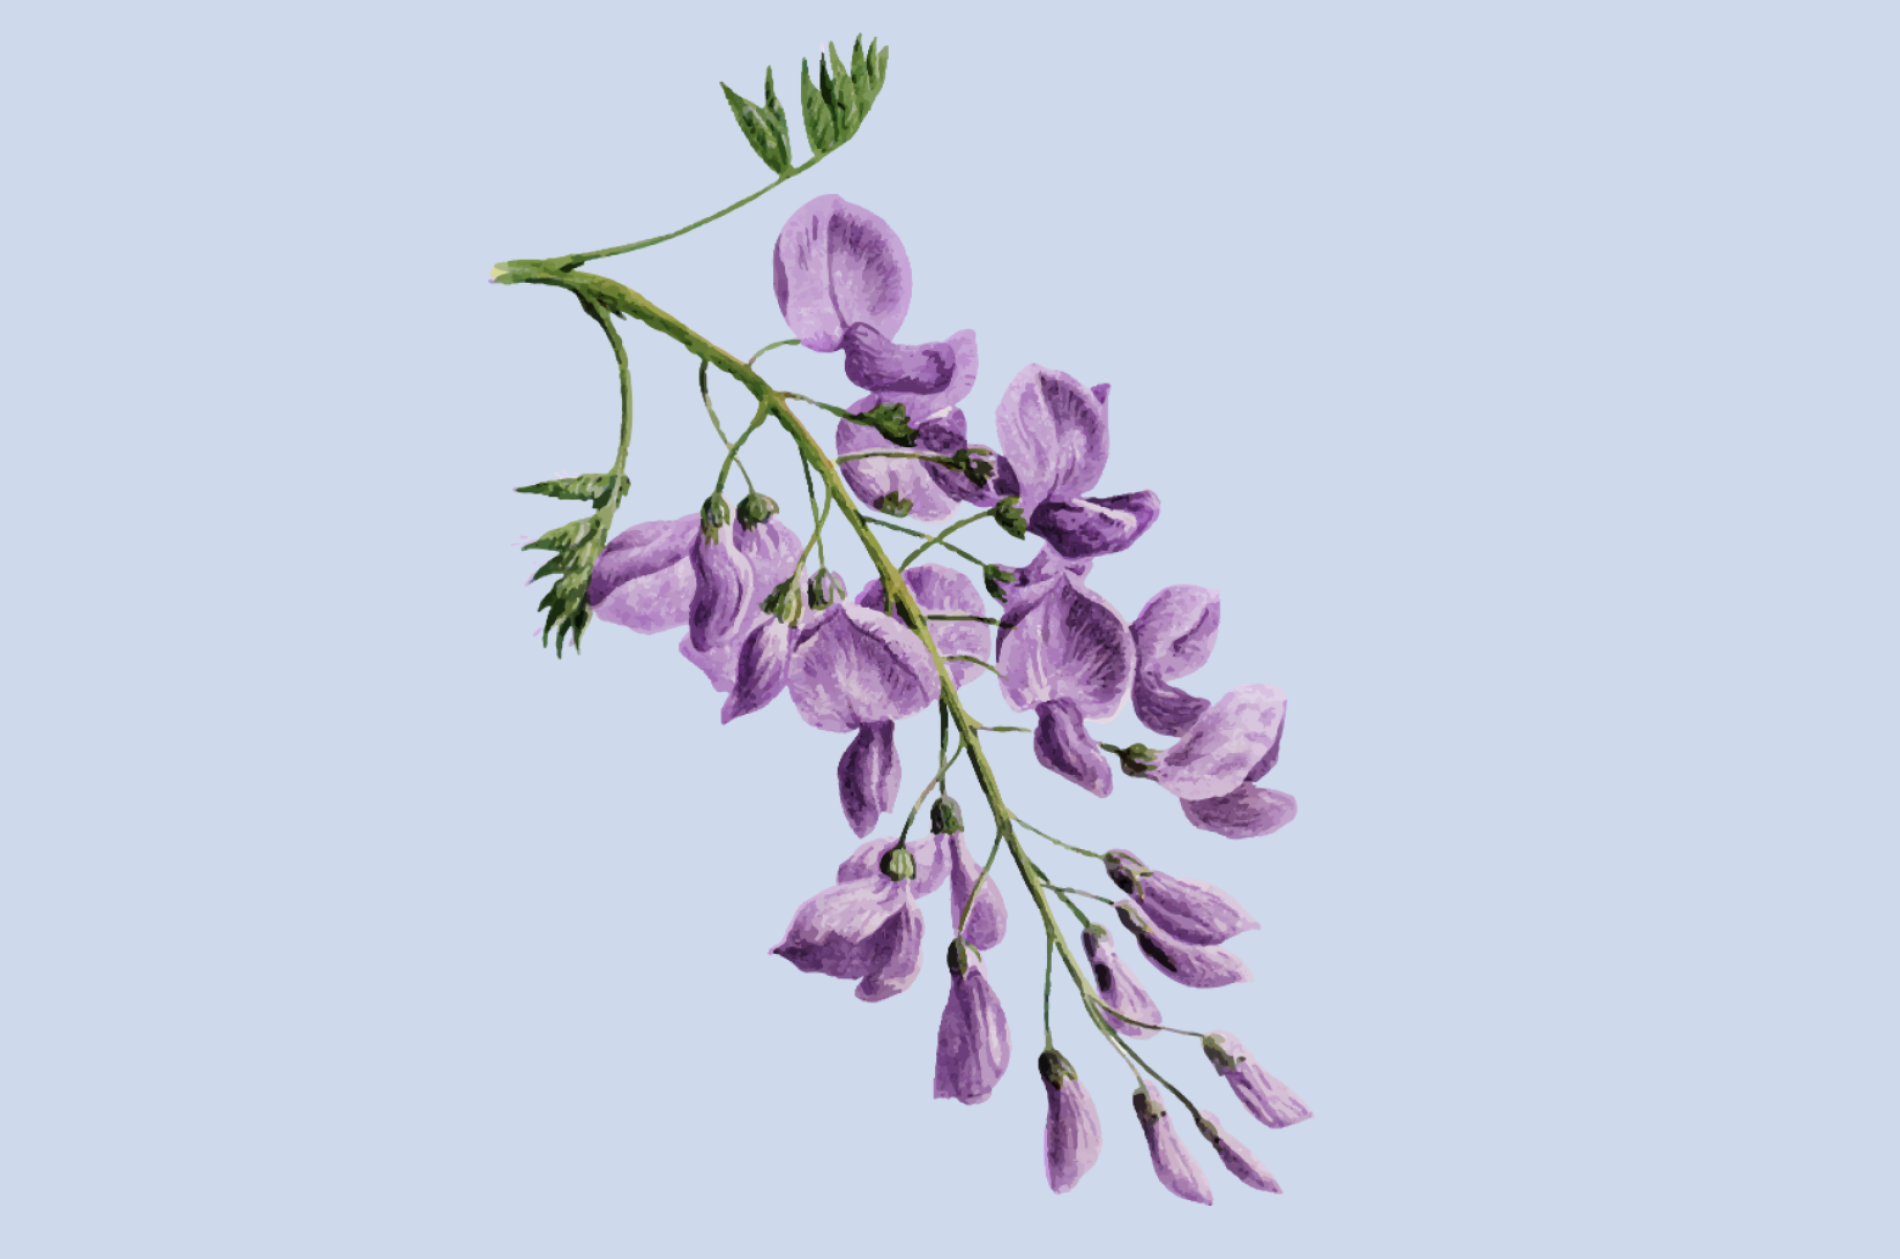 An artistic representation of a wisteria branch on a pale lavender ground.